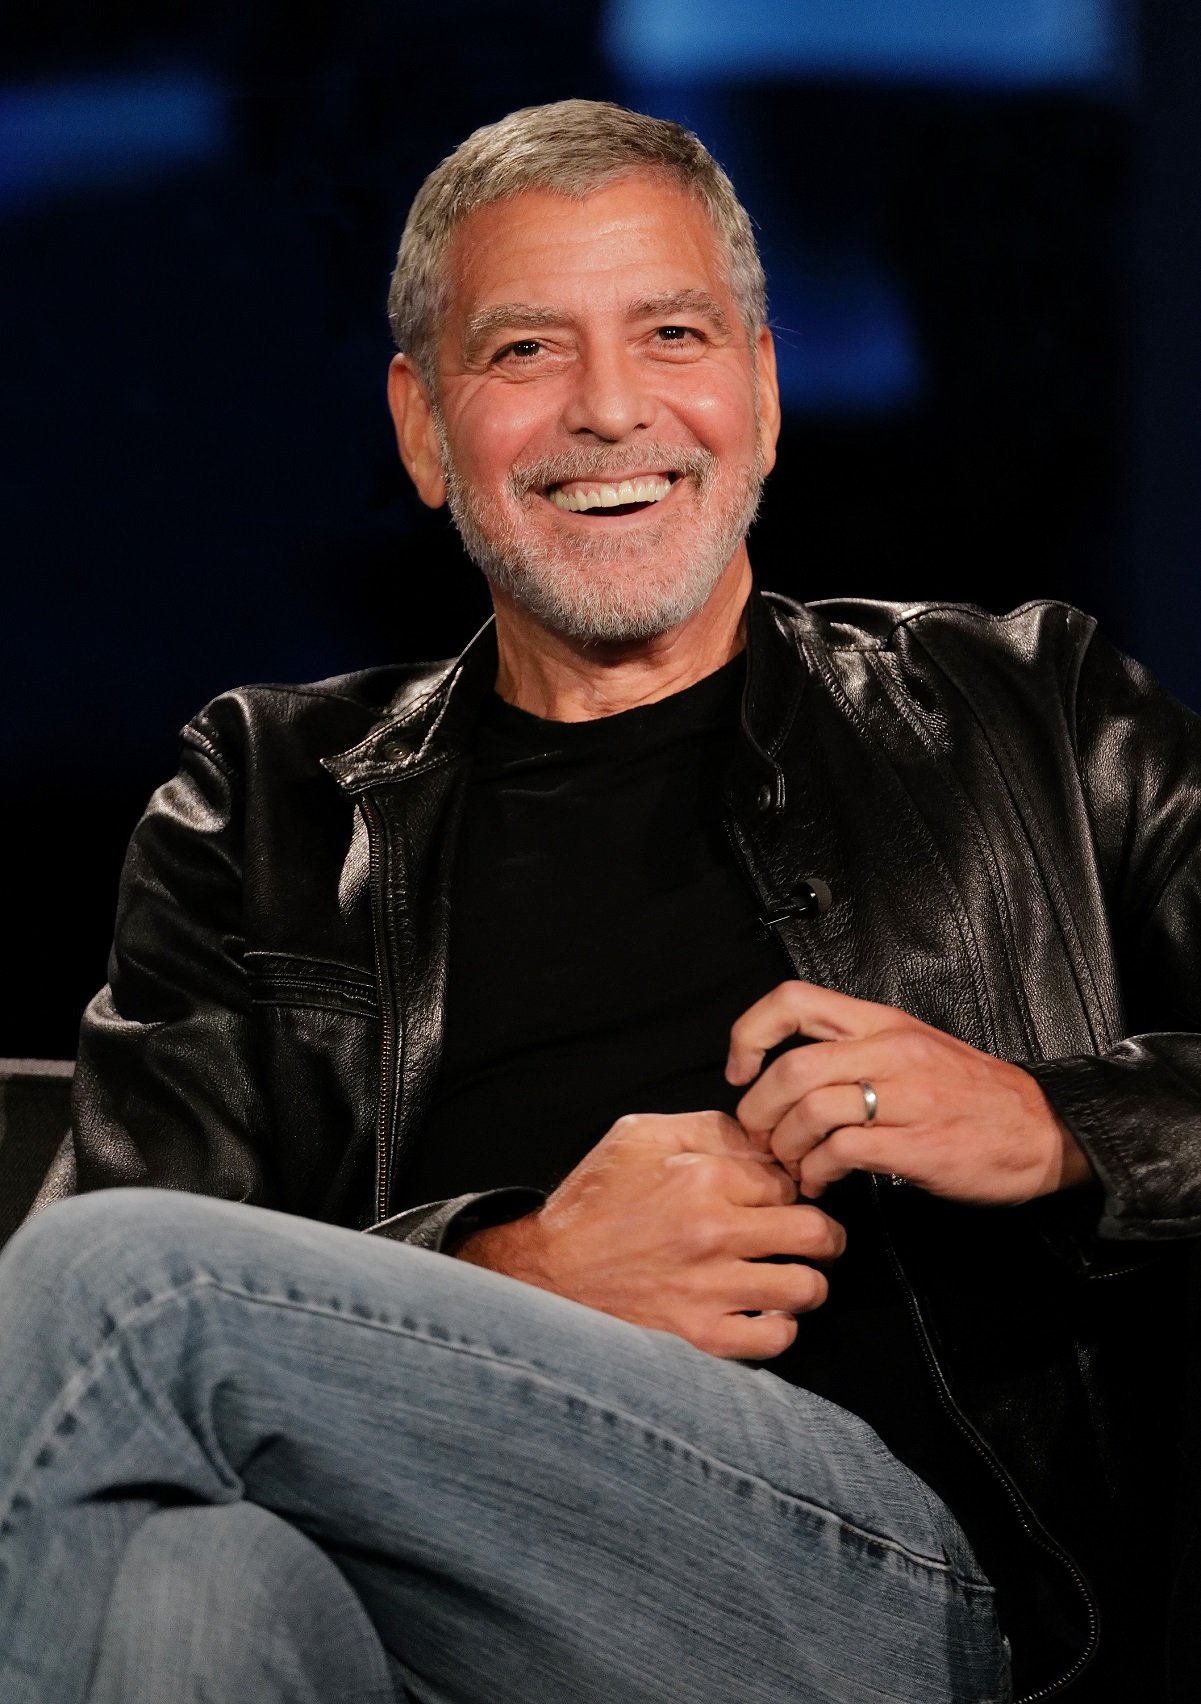 George Clooney dressed down on the set of 'Jimmy Kimmel Live!'